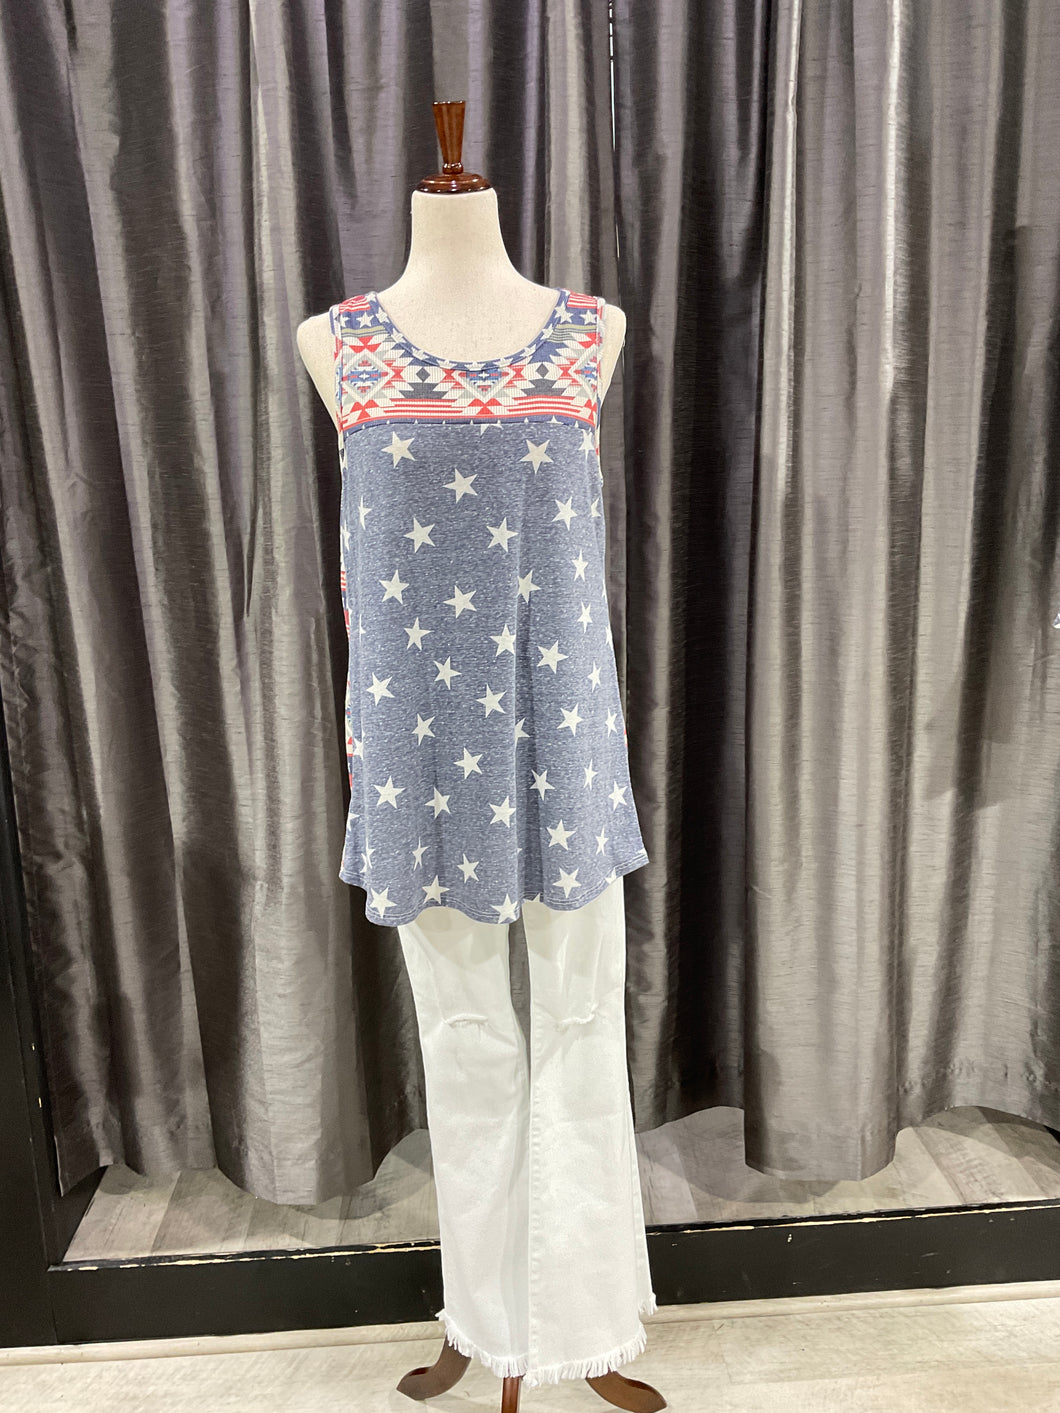 416-6 Aztec Fourth of July Top